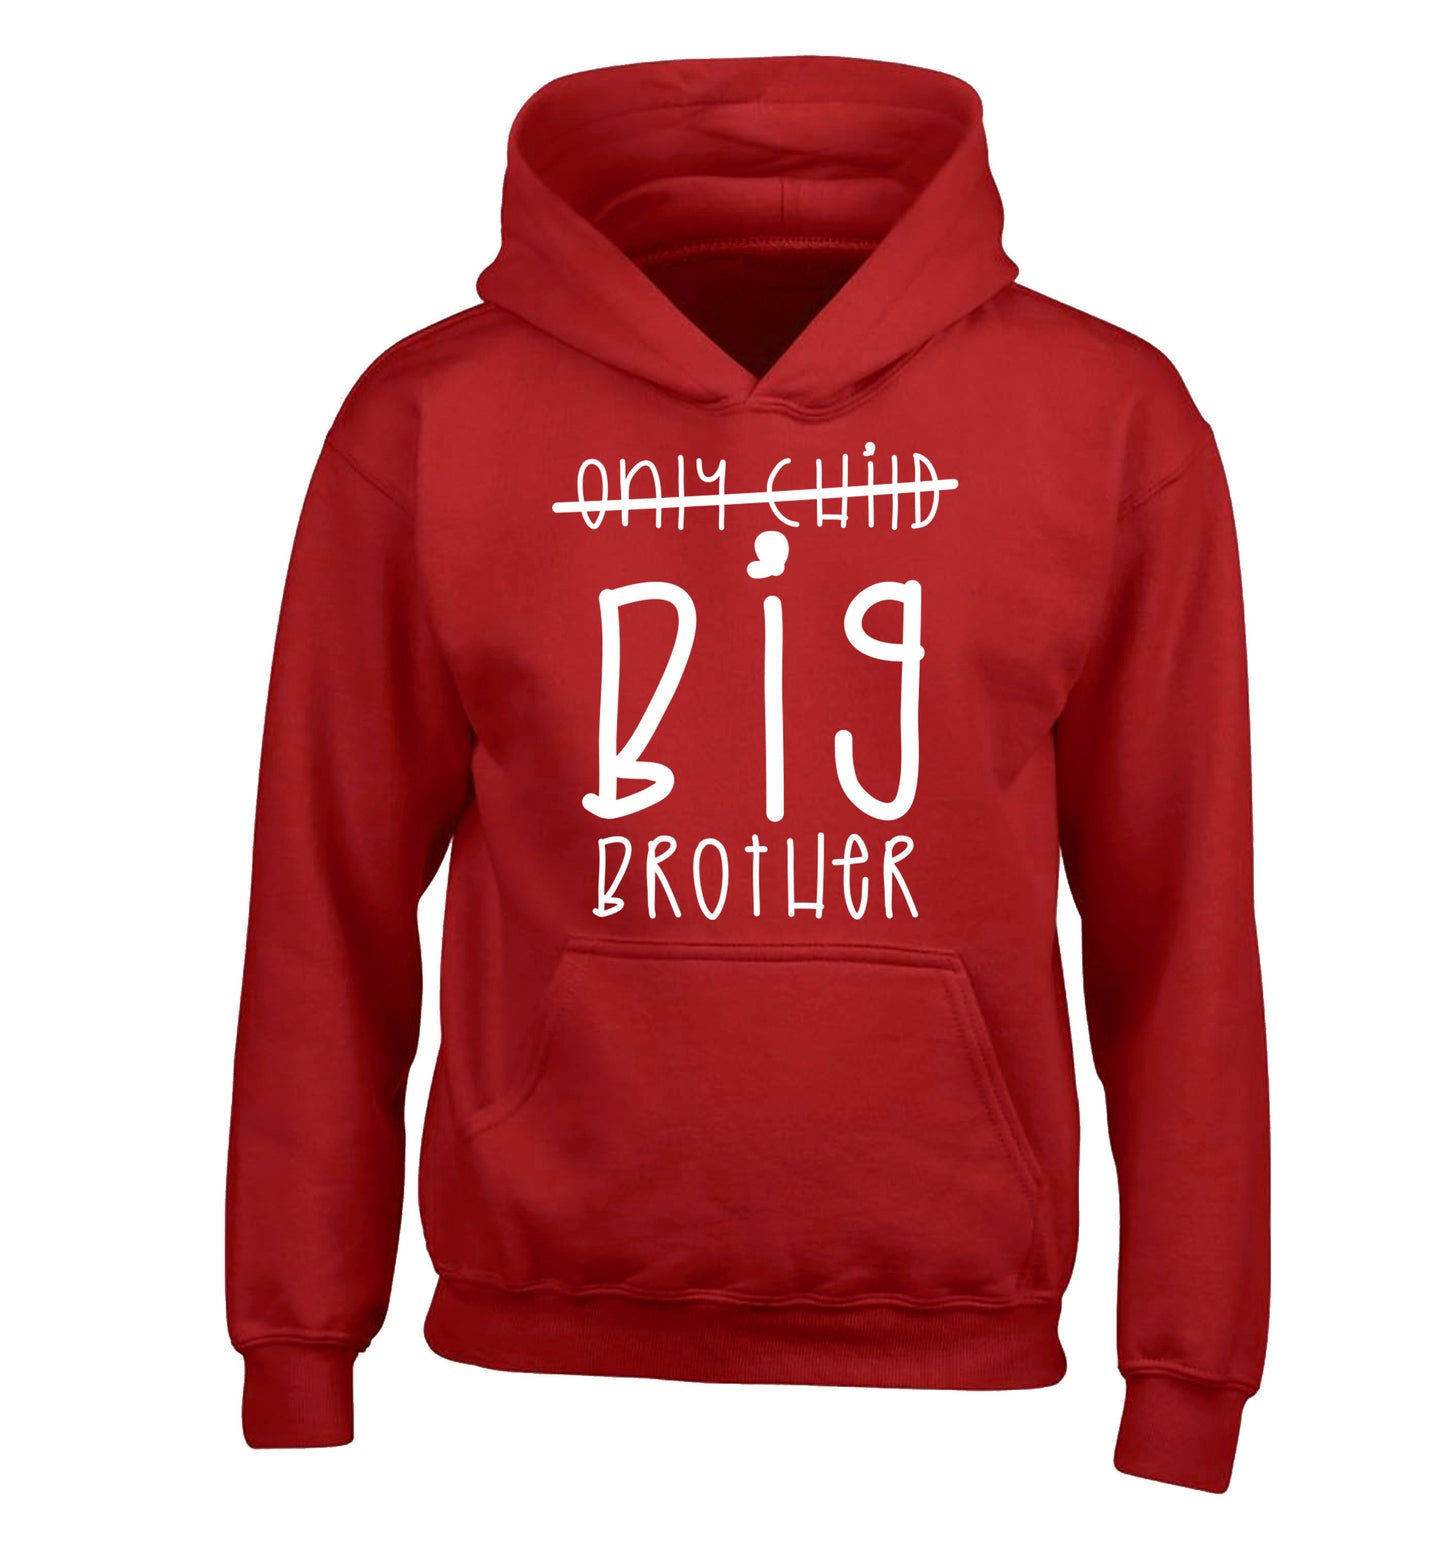 Only child big brother children's red hoodie 12-14 Years